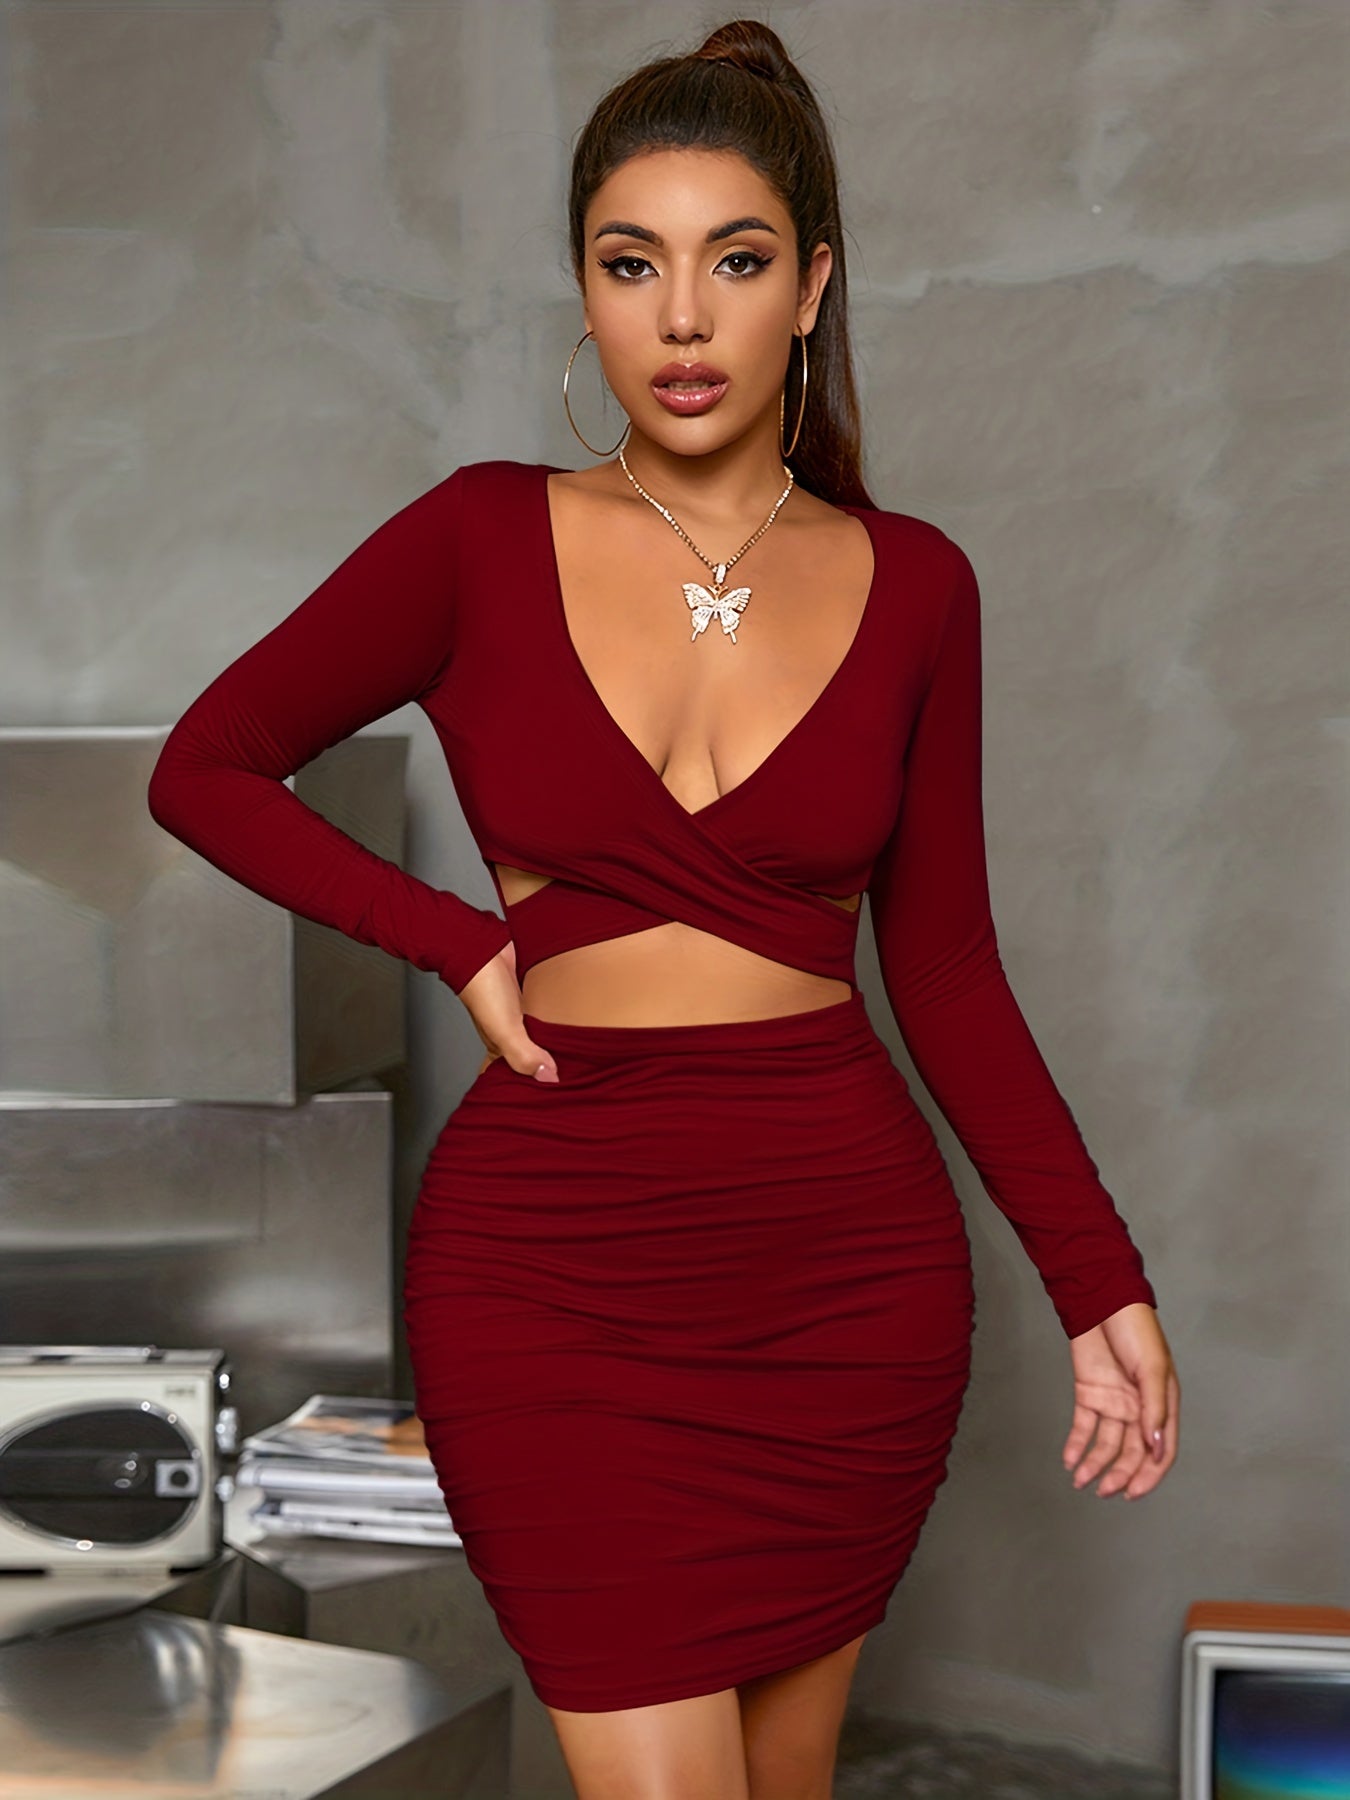 vlovelaw  Cut Out Plunging Dress, Sexy Long Sleeve Bodycon Ruched Dress, Women's Clothing